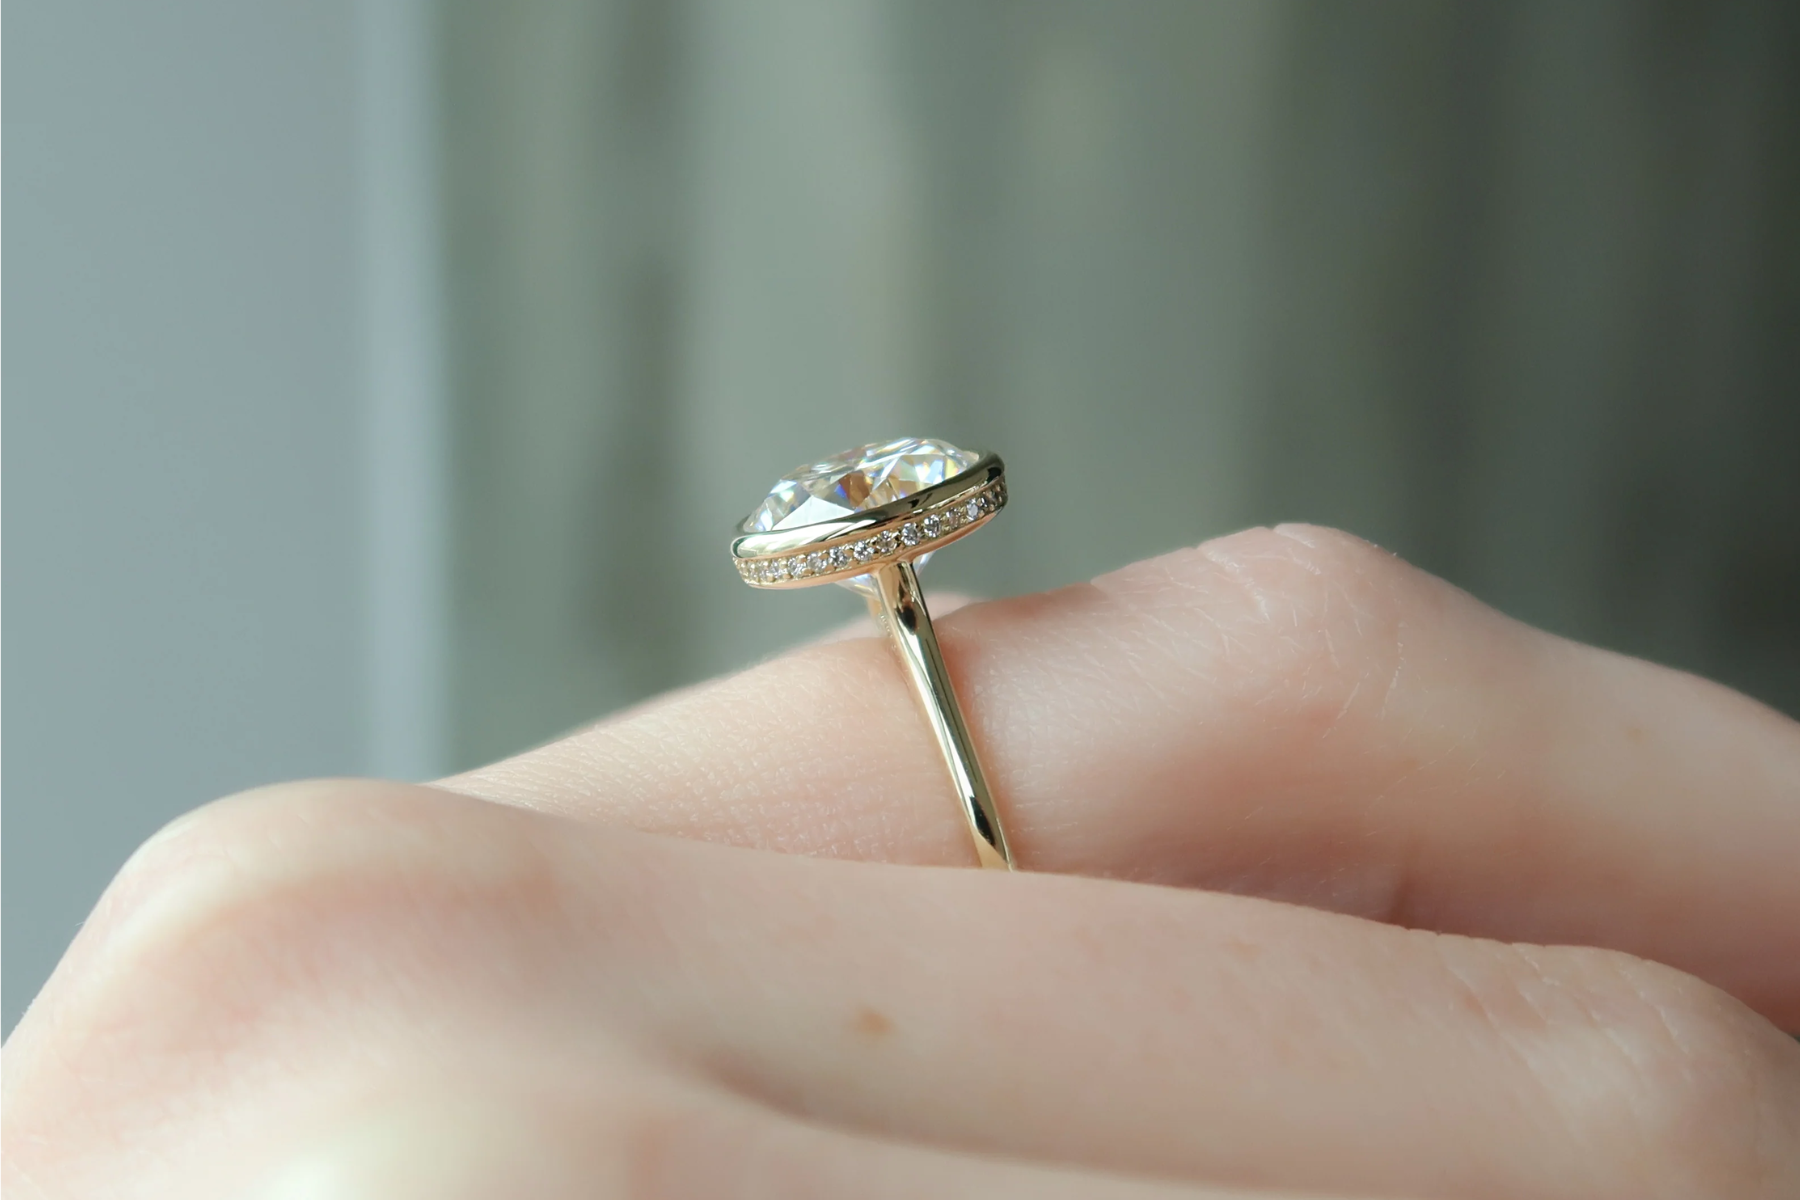 An engagement ring with a bezel setting on a woman's finger